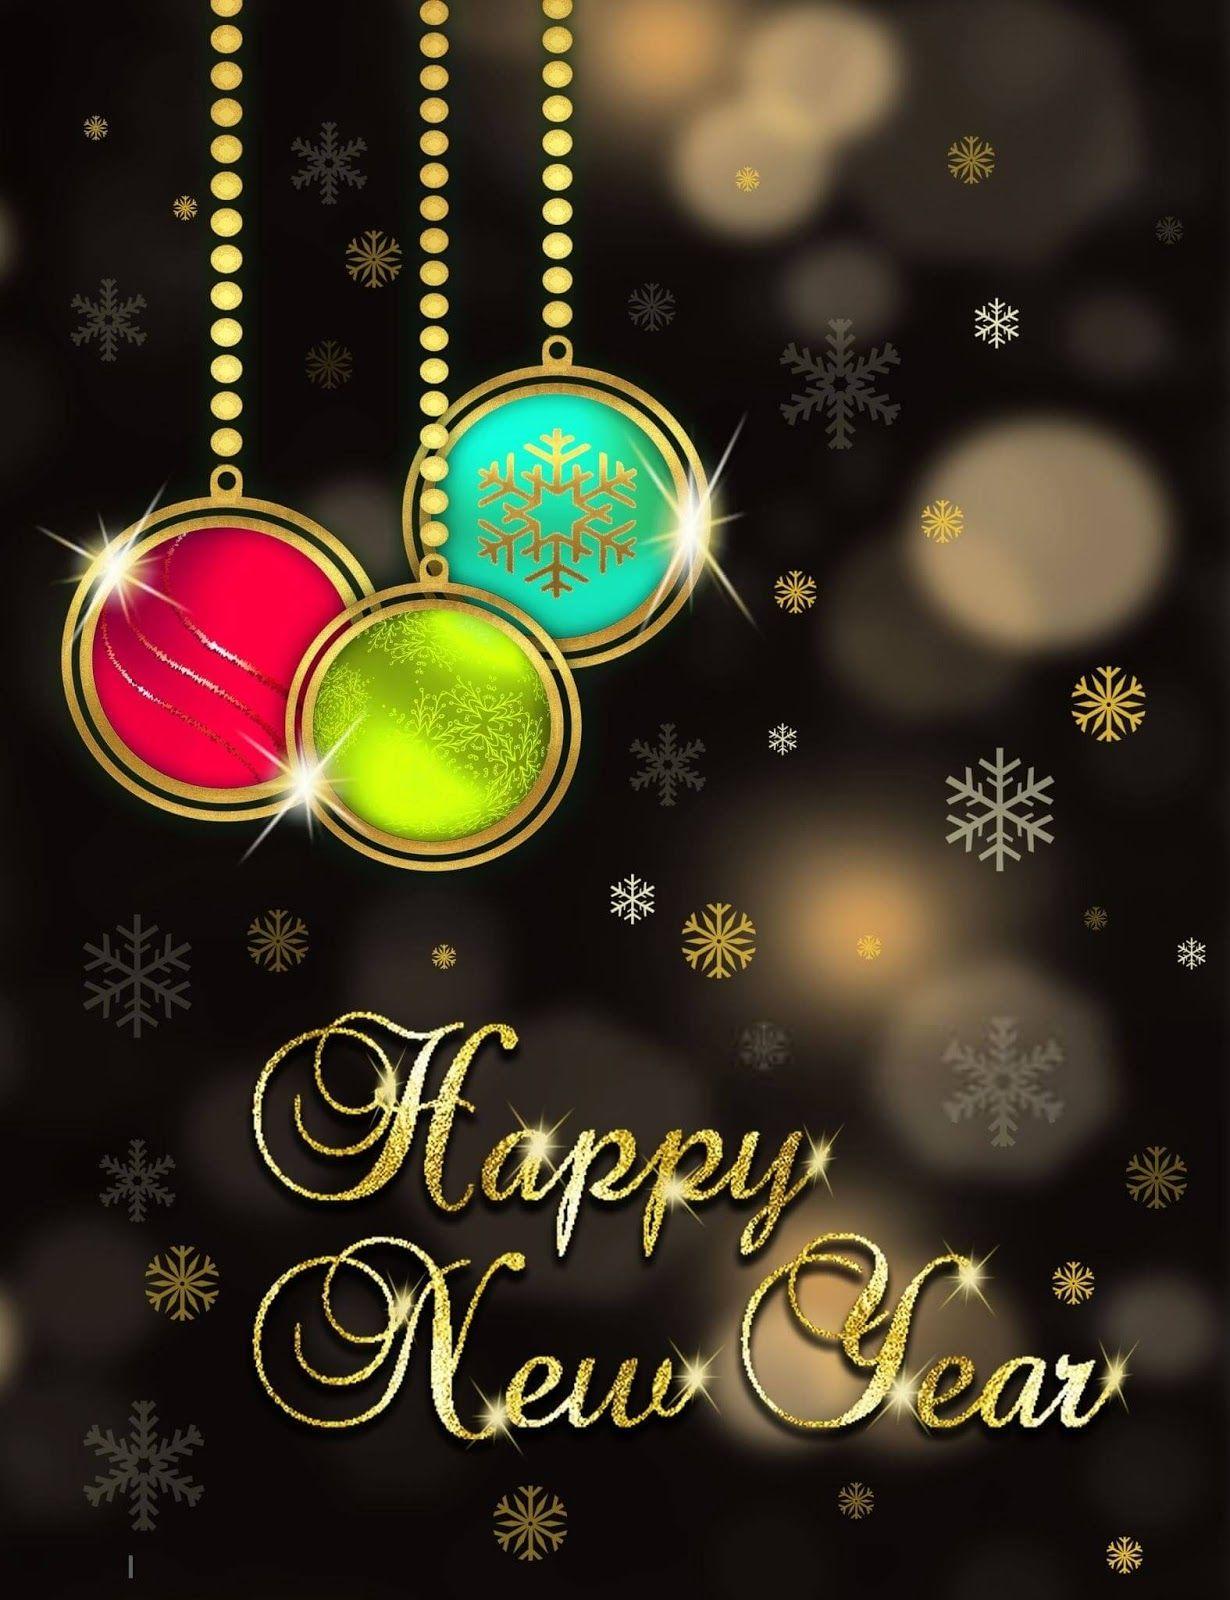 Happy New Year 2022 pictures & Image Download Free